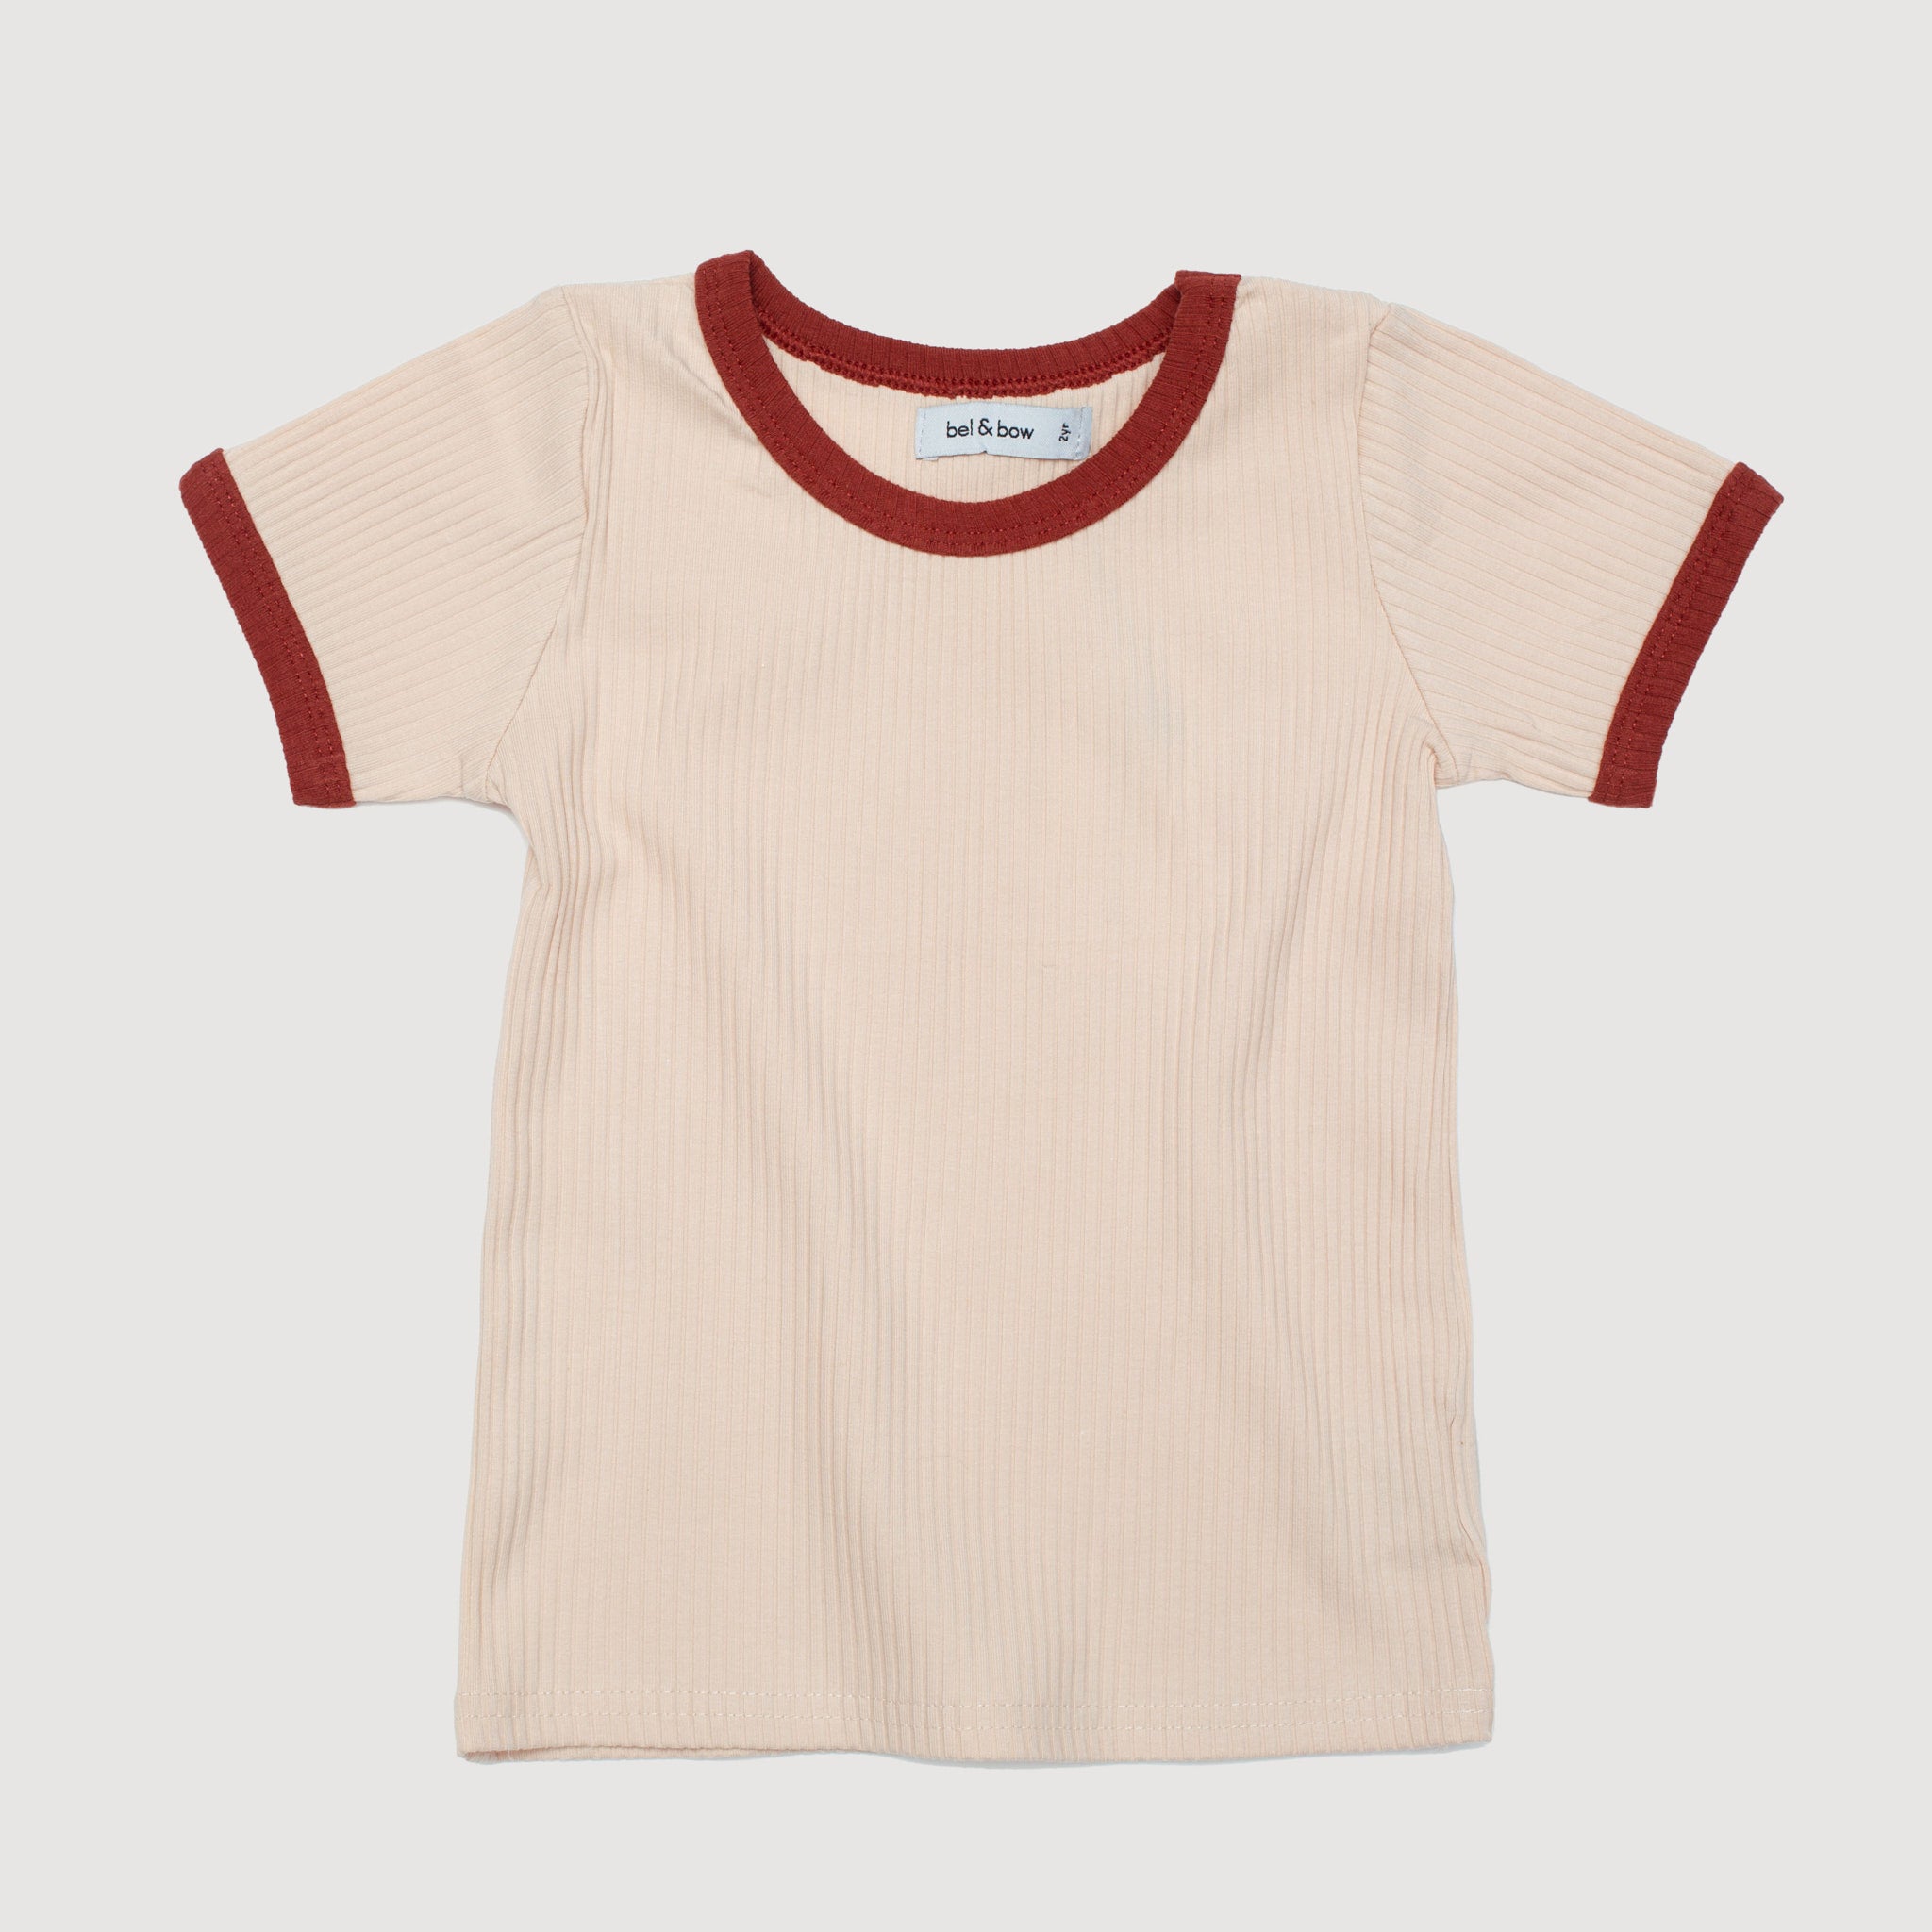 Retro Ringer Ribbed Tee - Light Oatmeal with Rust Binds bel & bow